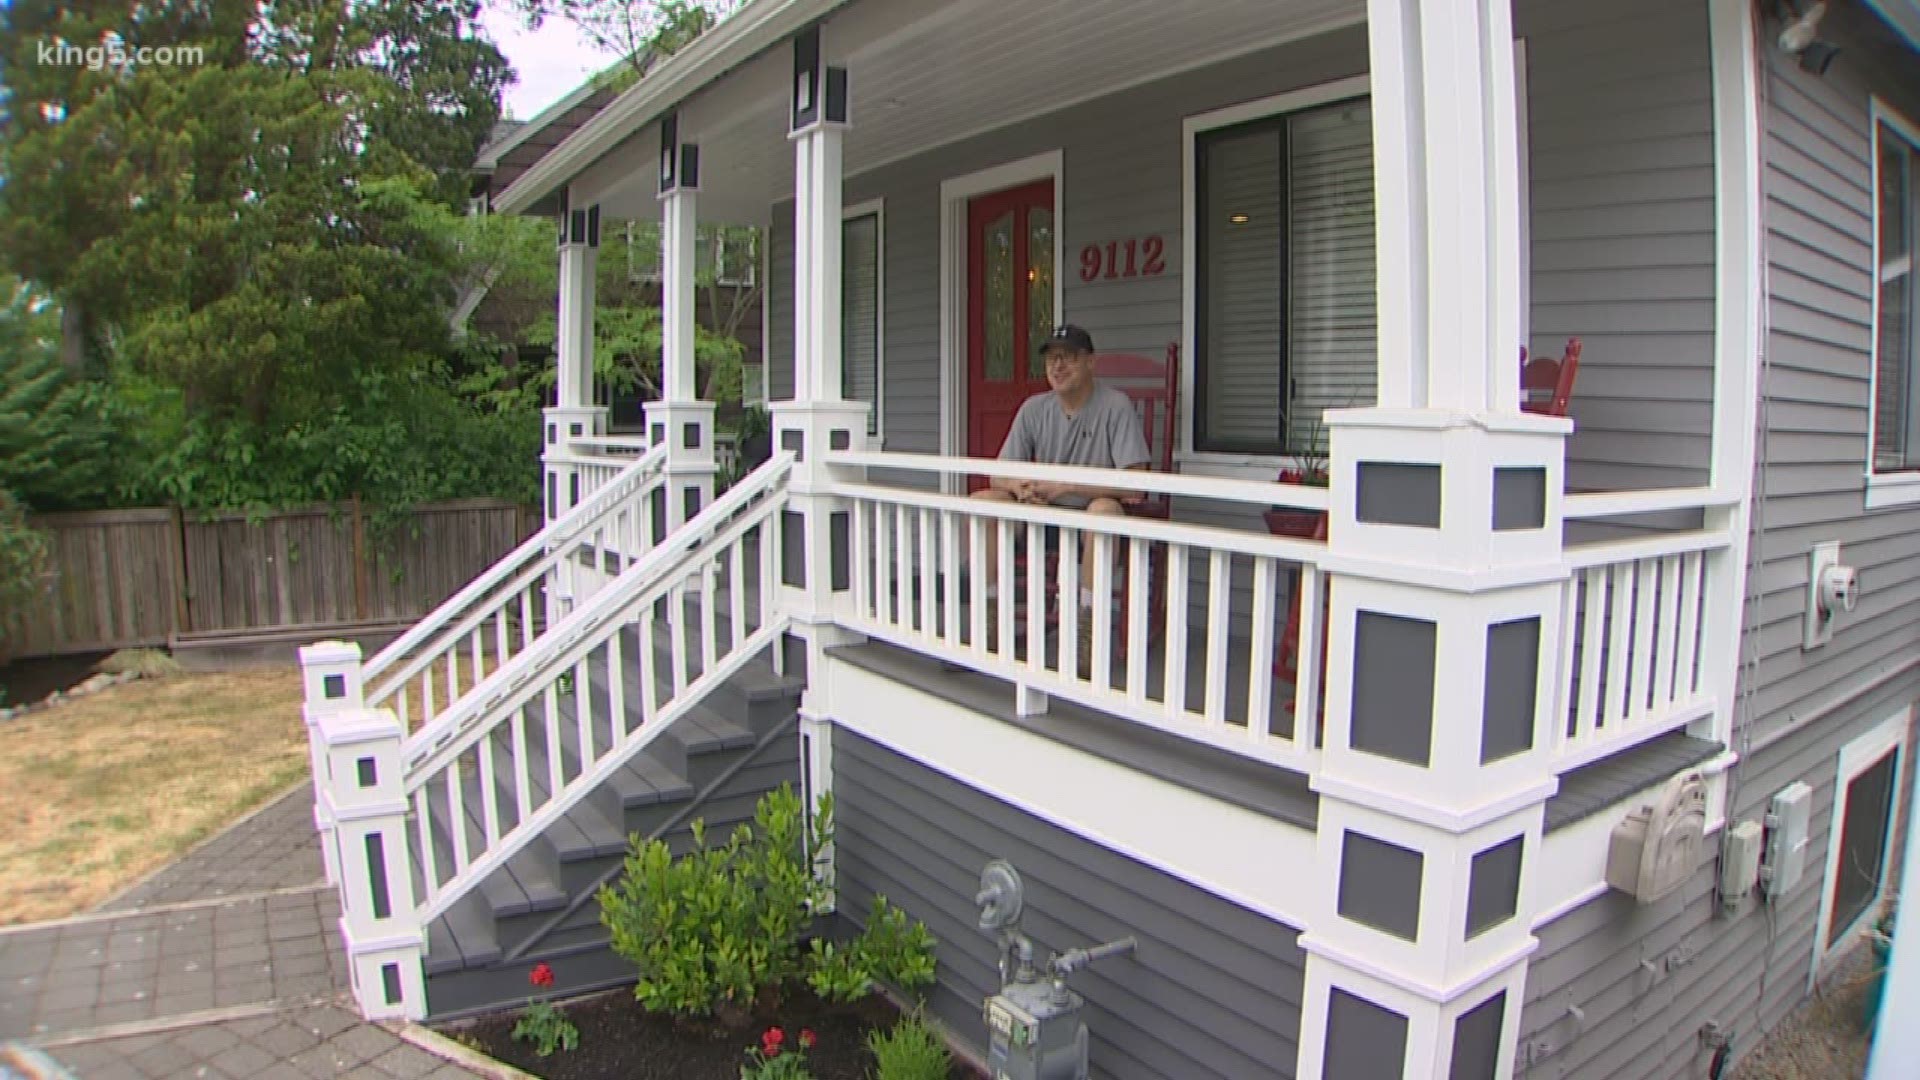 Good news for house hunters searching in King County.